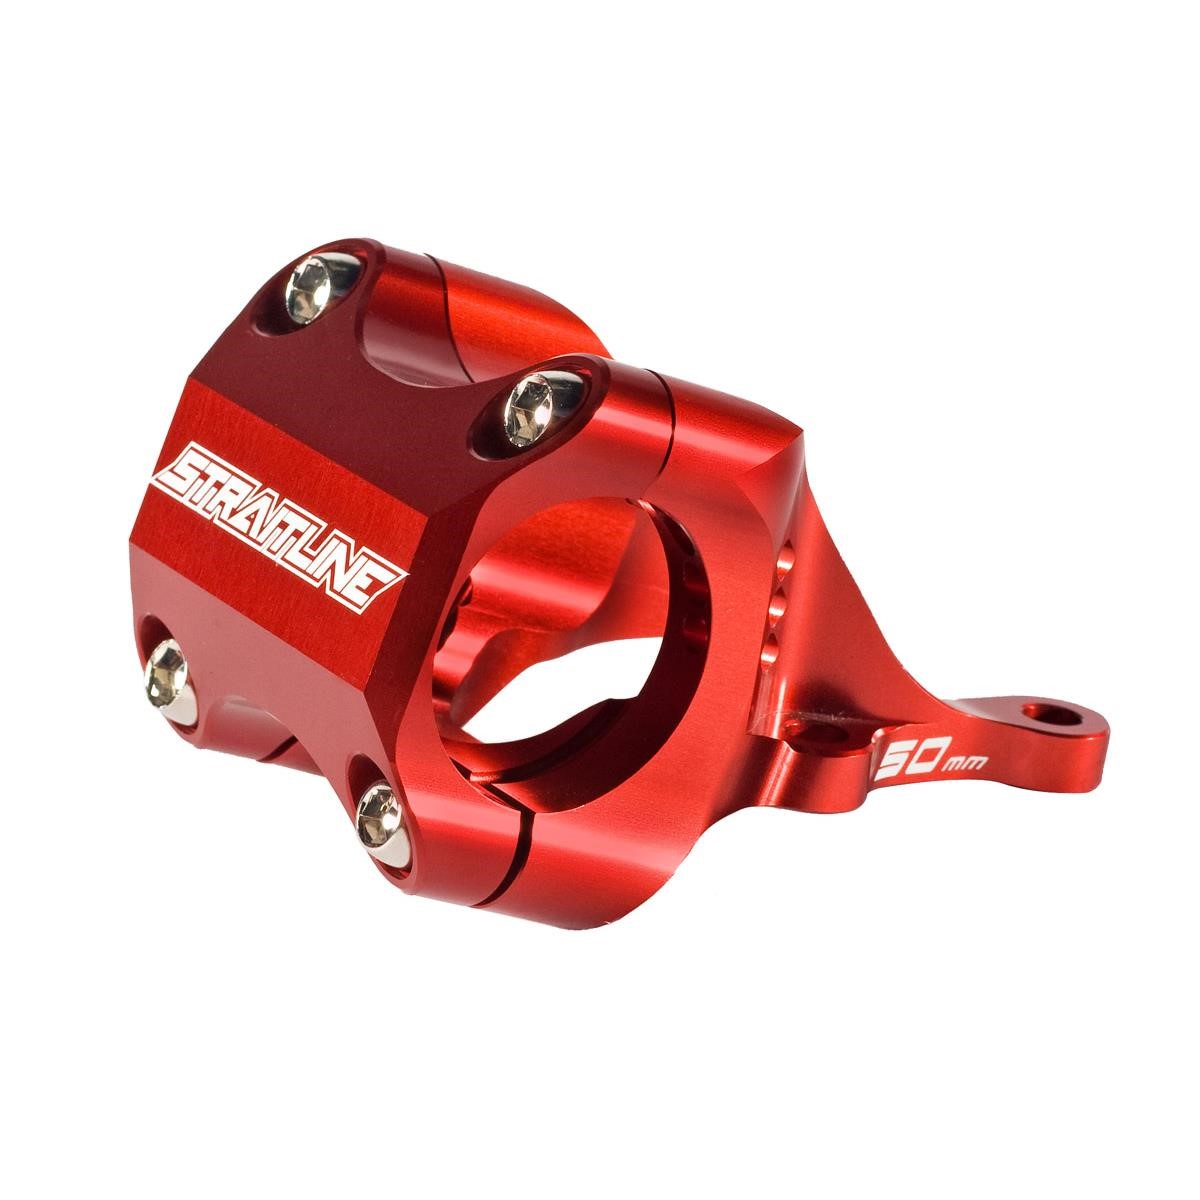 Straitline Components MTB Stem Boxxer Ultra Red, 31.8 mm, 50 mm